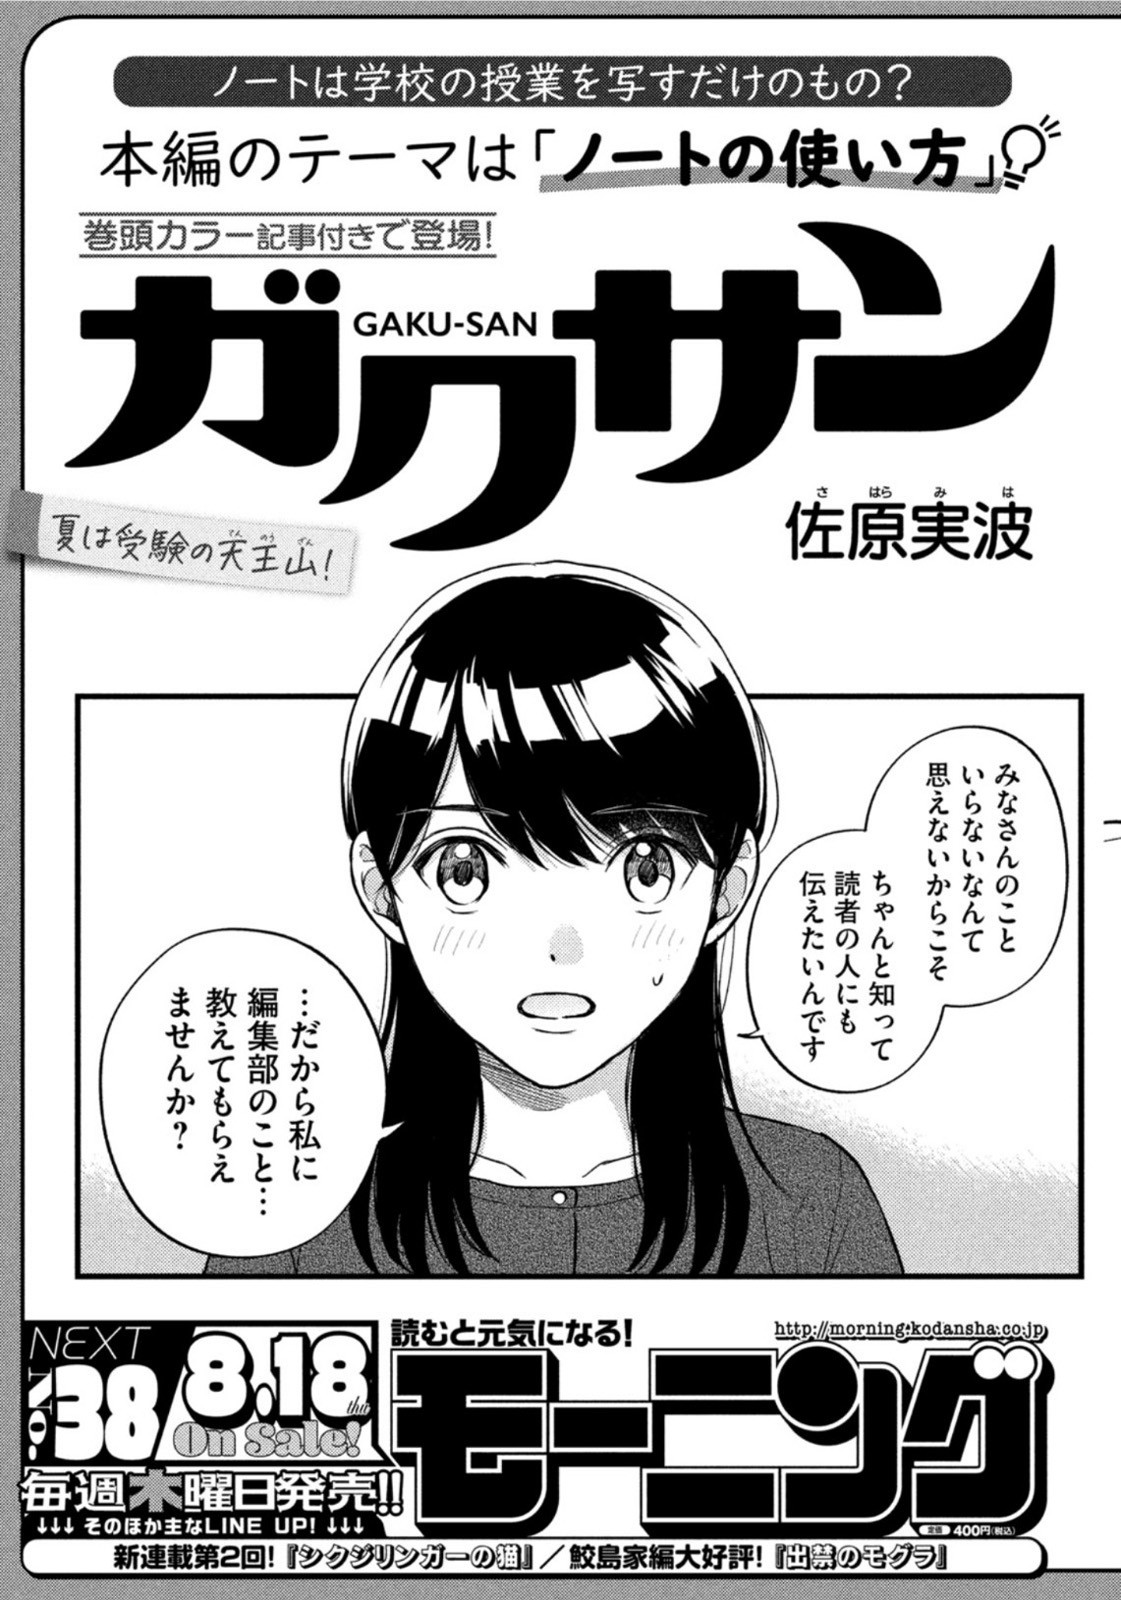 Weekly Morning - 週刊モーニング - Chapter 2022-36-37 - Page 422